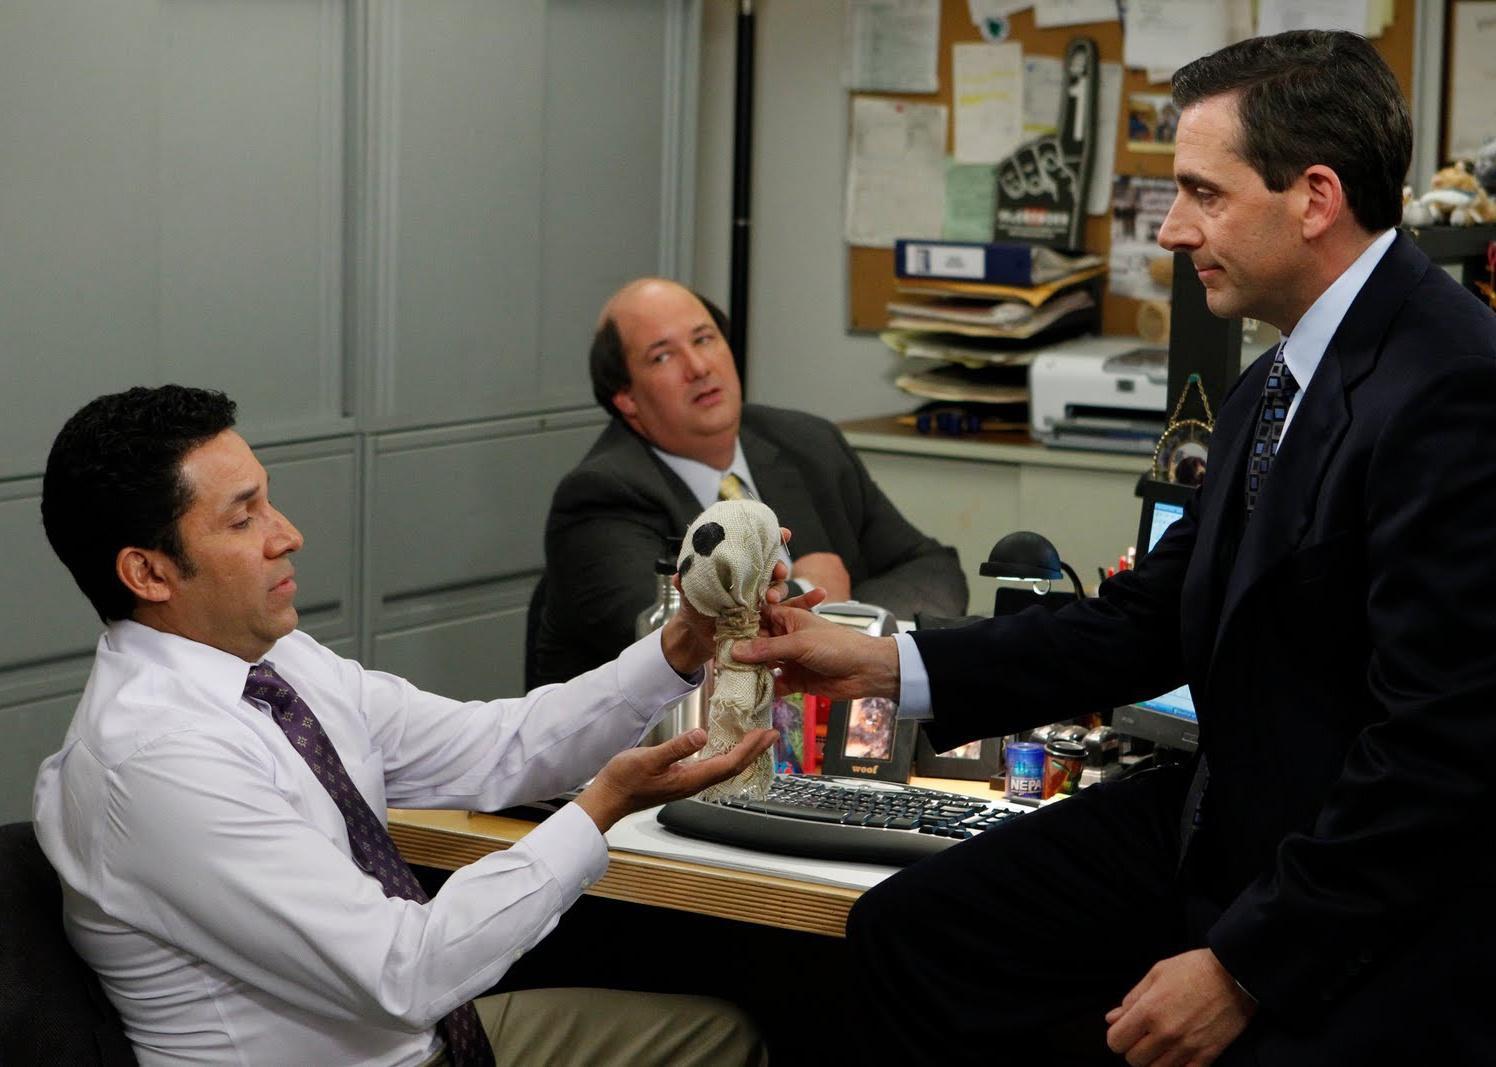 Steve Carell hands a burlap object to another man in an office.